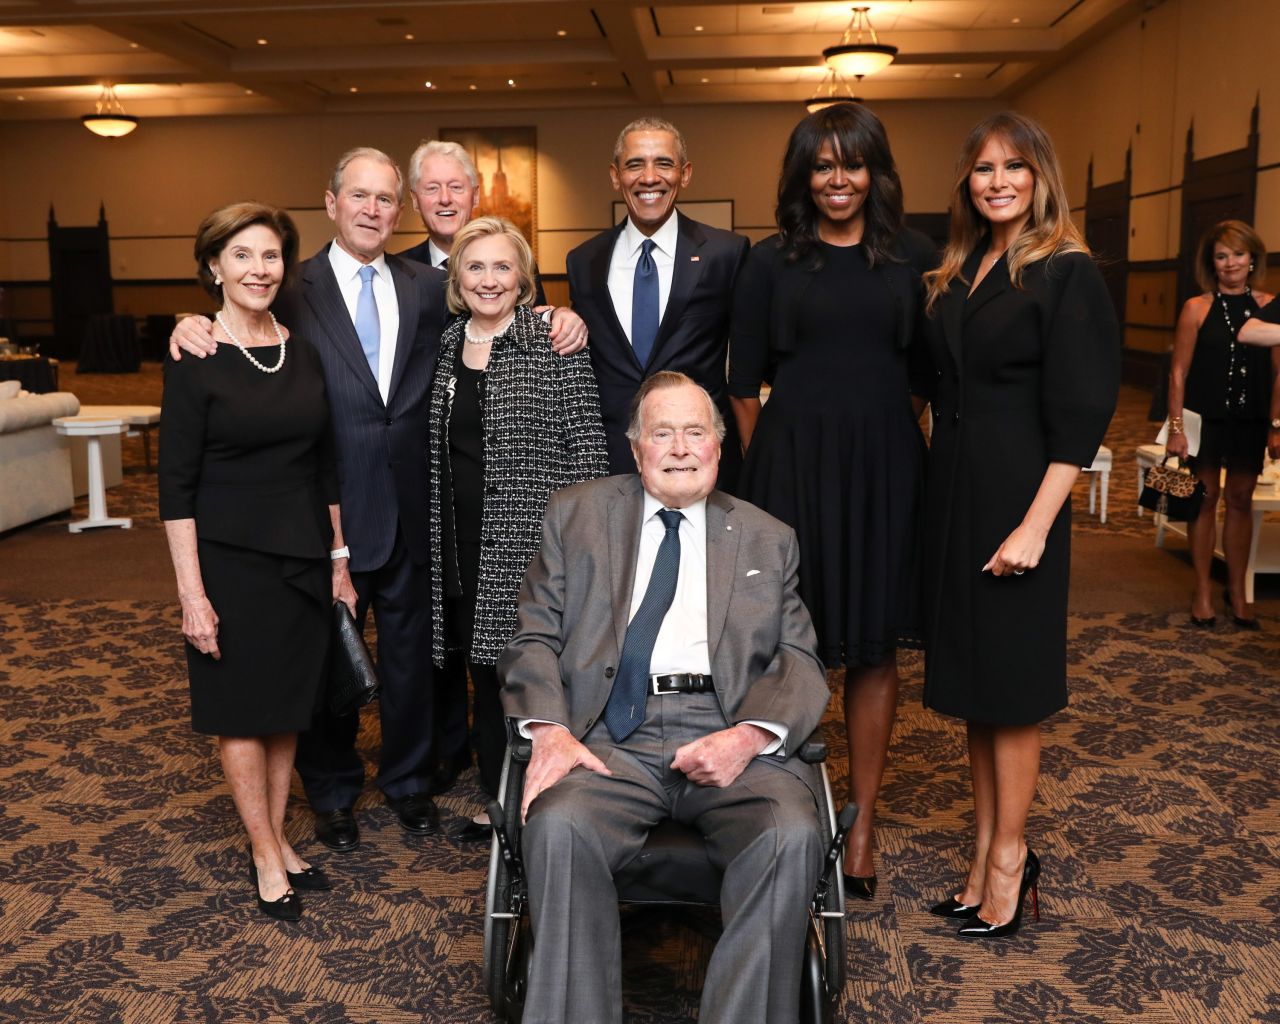 Former US President George H.W. Bush, front center, joins other former Presidents and first ladies at <a href="http://www.cnn.com/2018/04/21/politics/gallery/barbara-bush-funeral/index.html" target="_blank">the funeral ceremony for his wife, Barbara,</a> in April 2018. Behind Bush, from left, are Laura Bush, George W. Bush, Bill Clinton, Hillary Clinton, Barack Obama, Michelle Obama and current first lady Melania Trump. <a href="https://www.cnn.com/2018/04/23/politics/presidents-picture-barbara-bush-funeral-photographer/index.html" target="_blank">The story behind the photo</a>